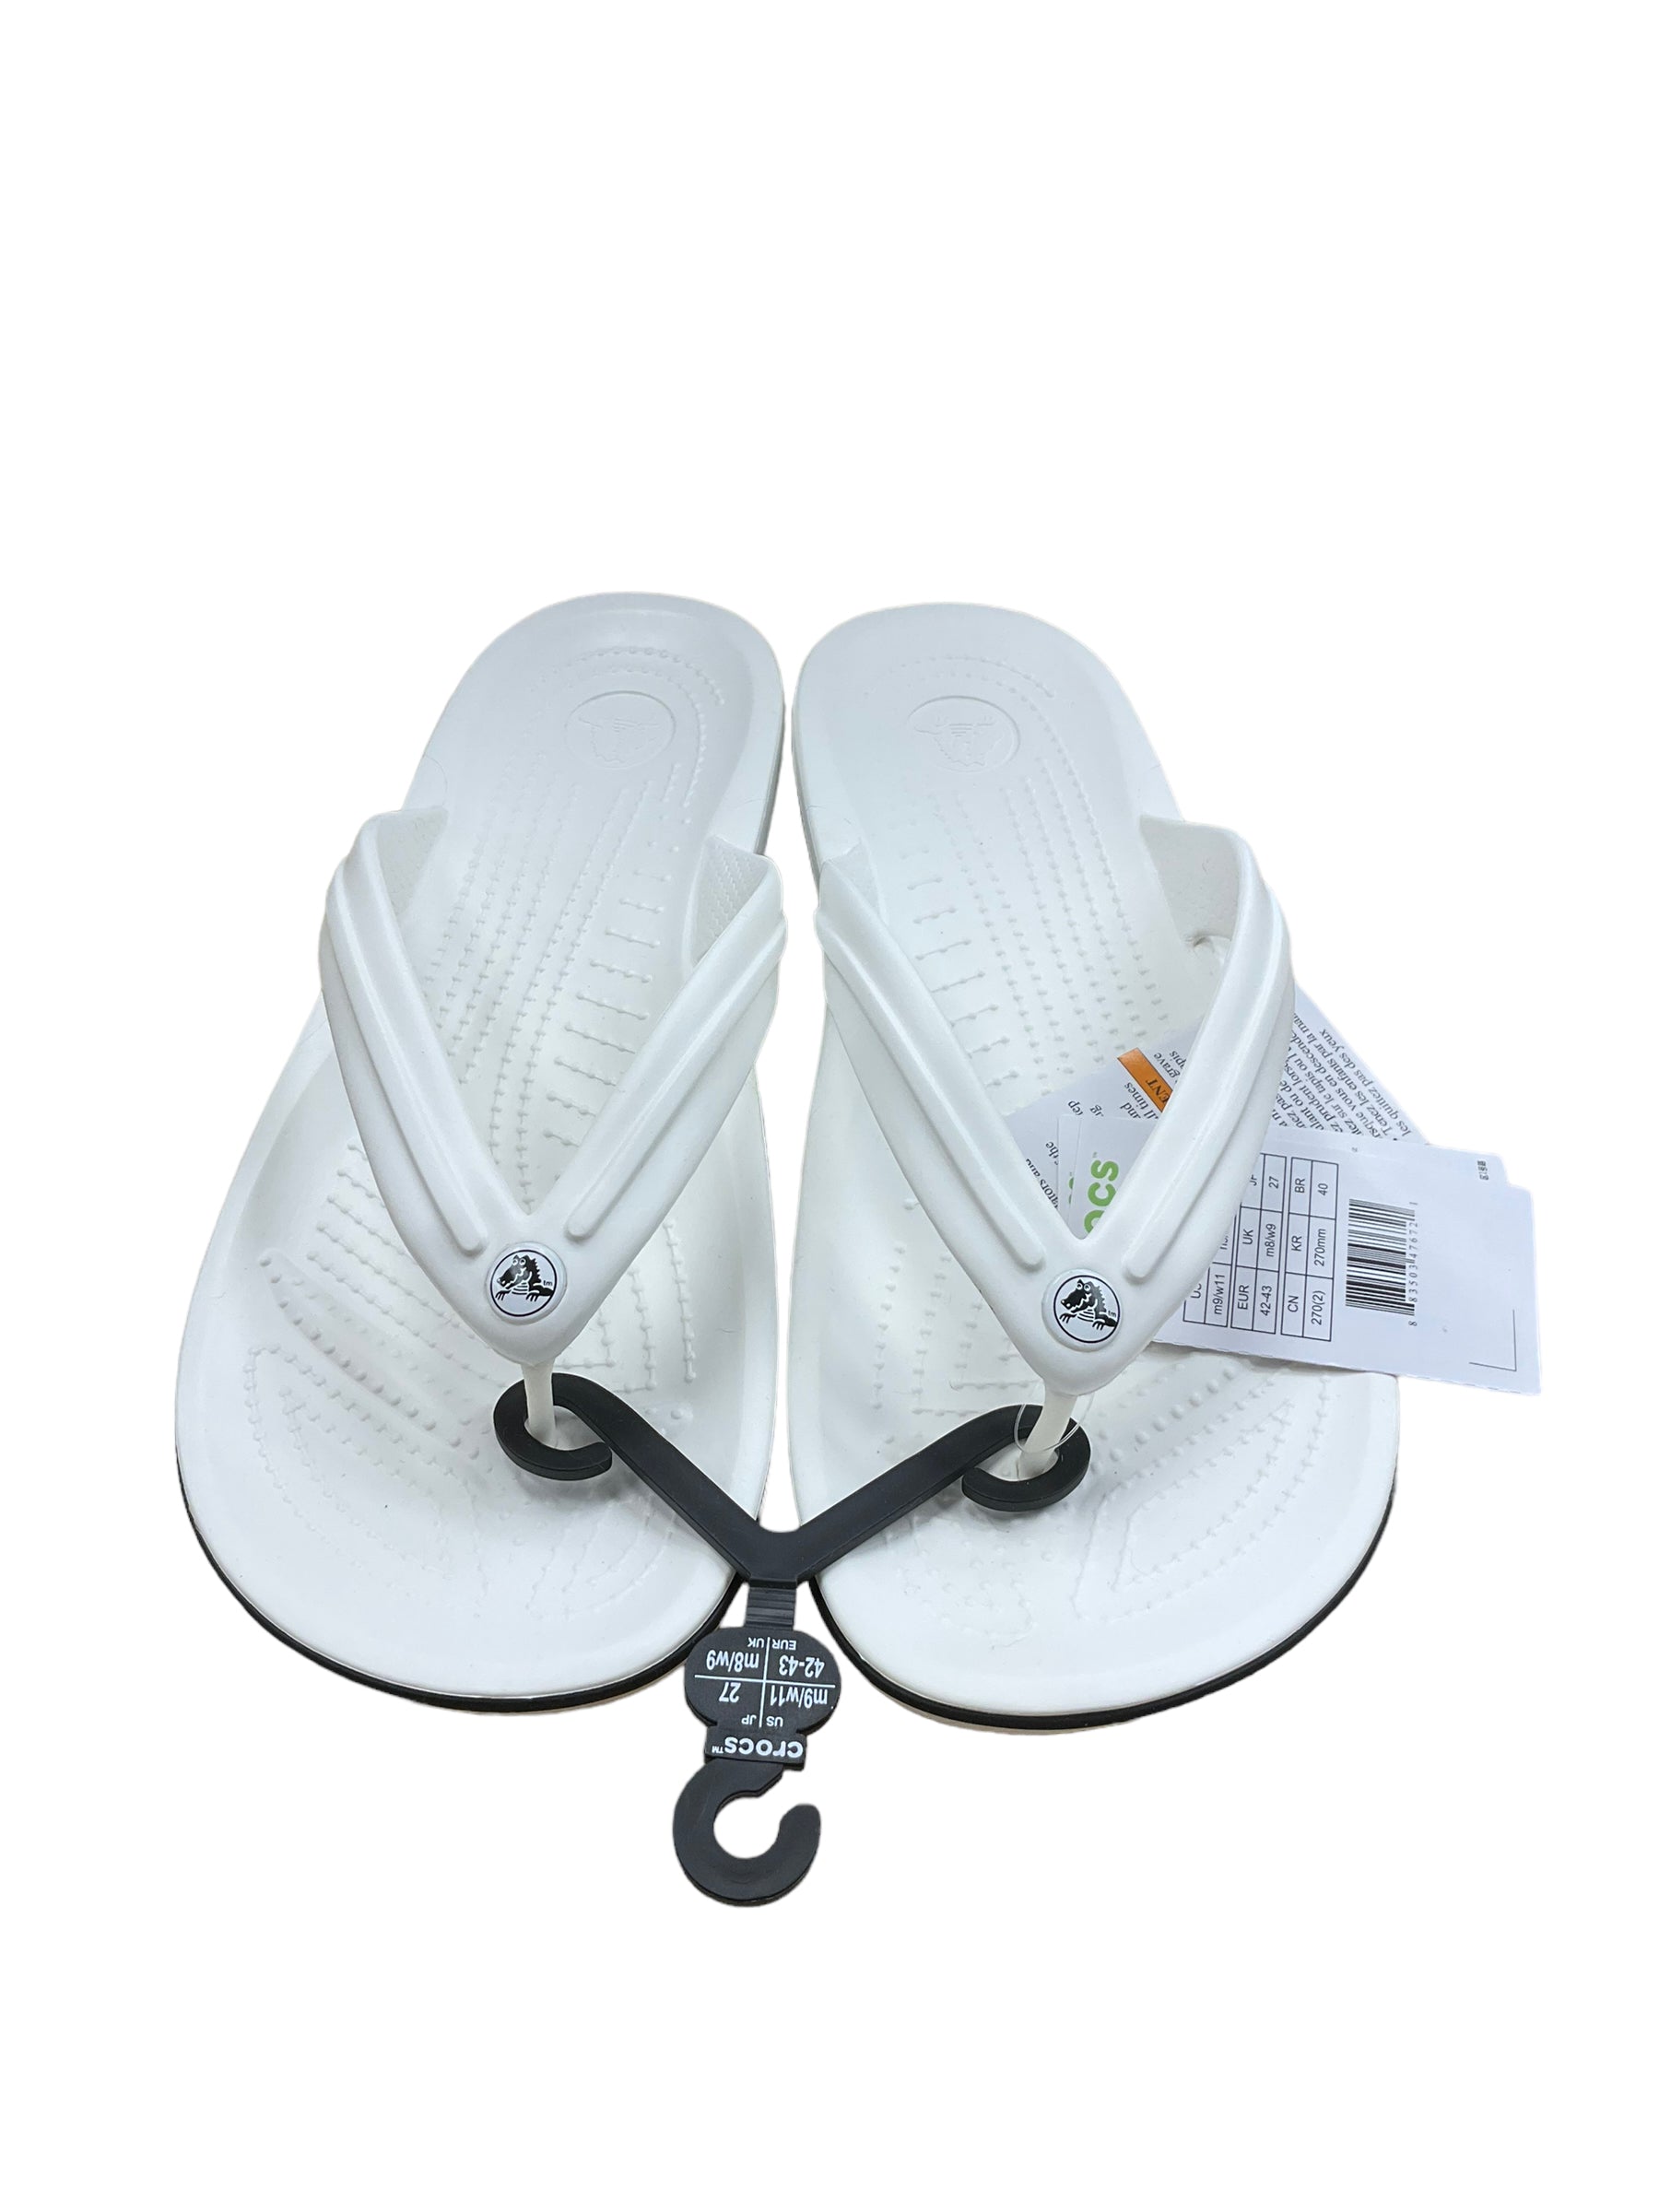 Party Wear White Comfortable High Heels Women'S Fashion Sandal, Size: 36-41  at Rs 360/pair in New Delhi